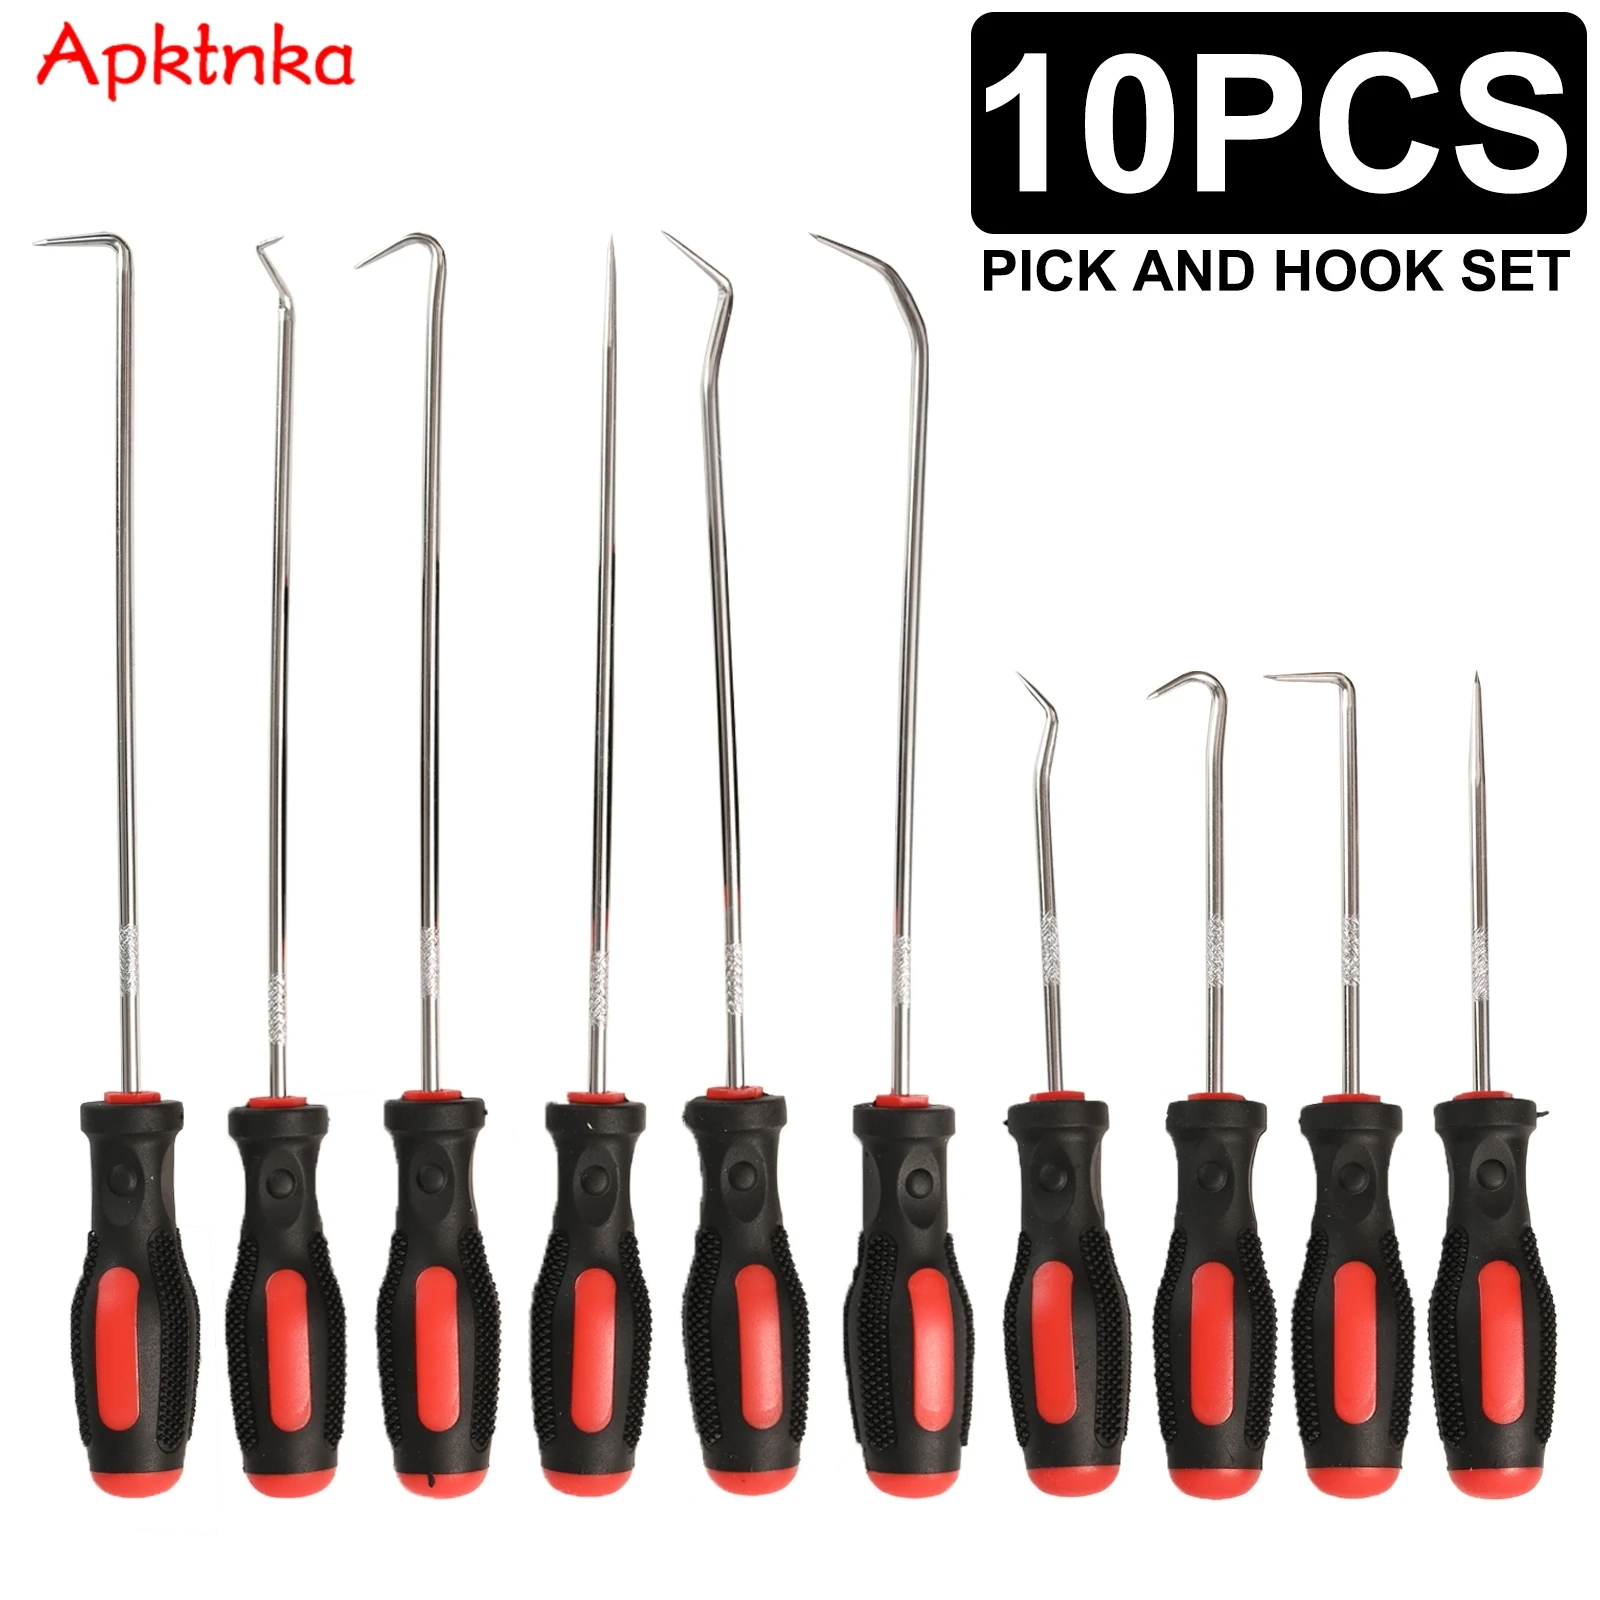 

10pcs Car Pick And Hook Set O Ring Seal Gasket Puller Oring Removal Screwdriver Hand Tool Oil Sealing Auto Vehicle Repair Tools